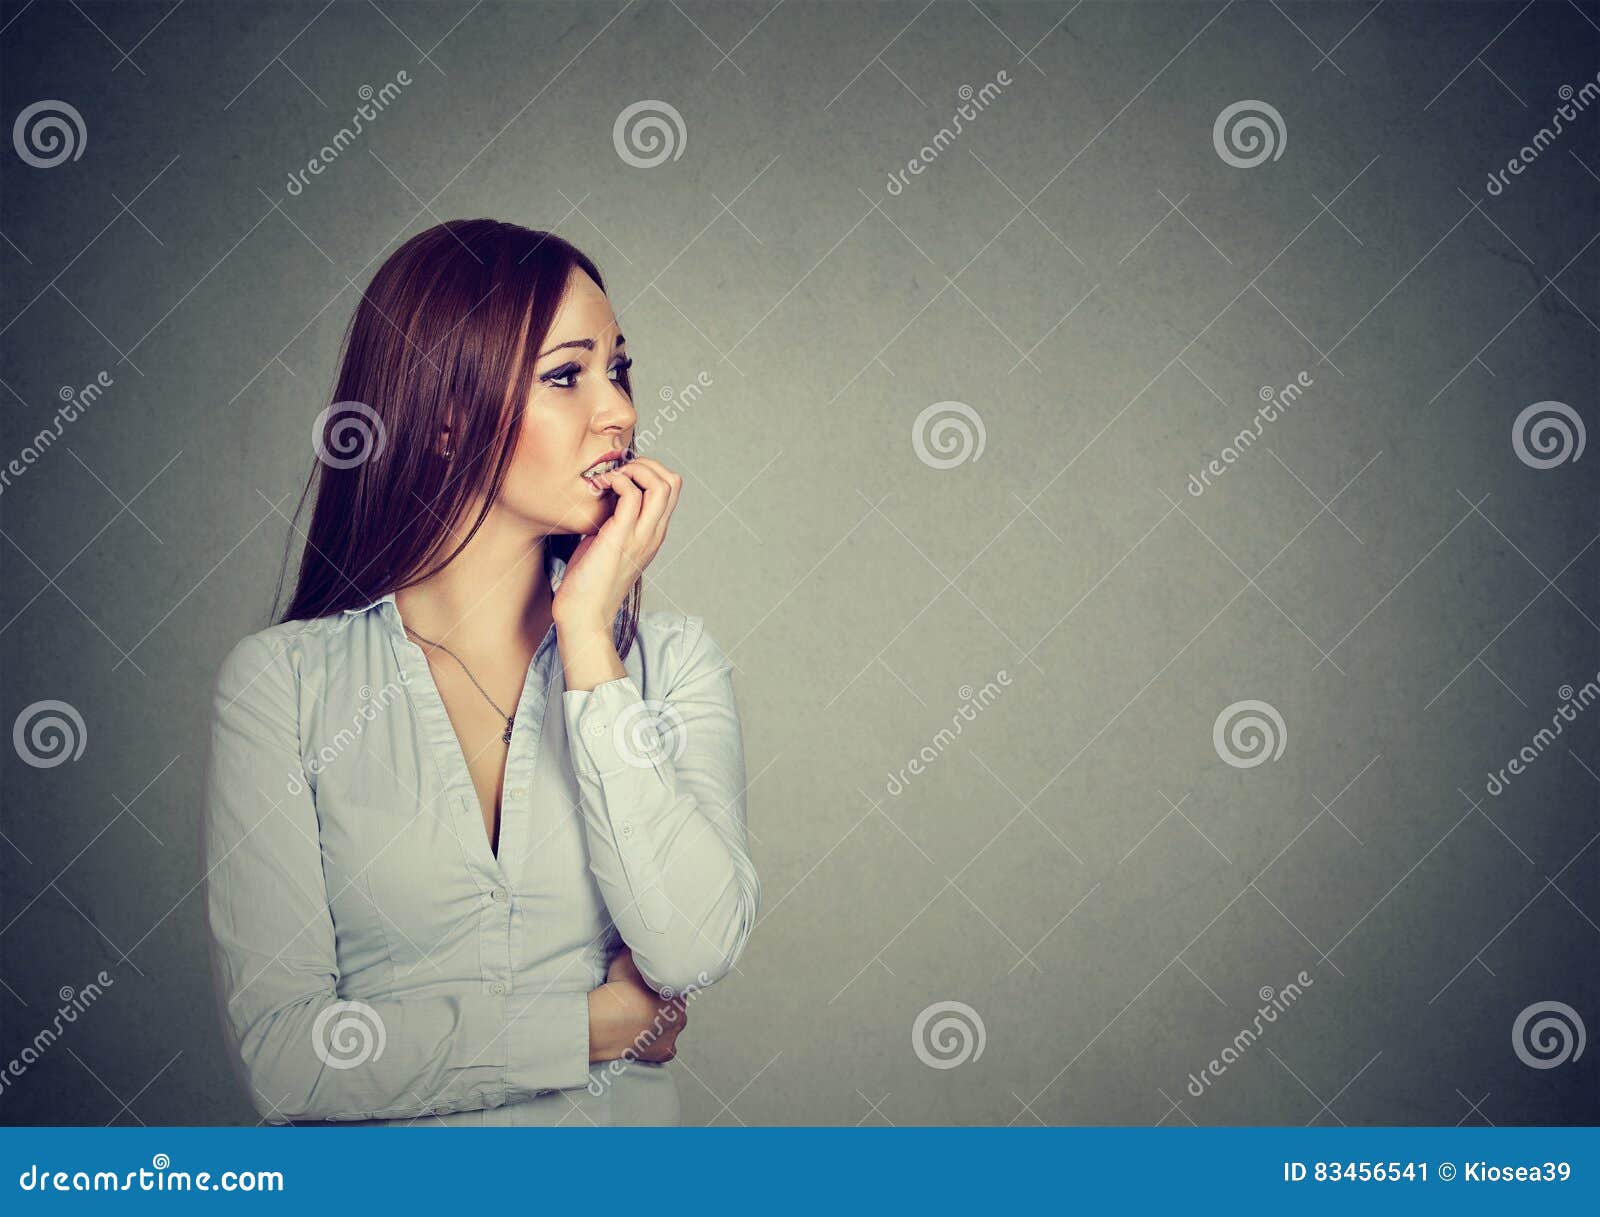 preoccupied anxious young woman biting fingernails